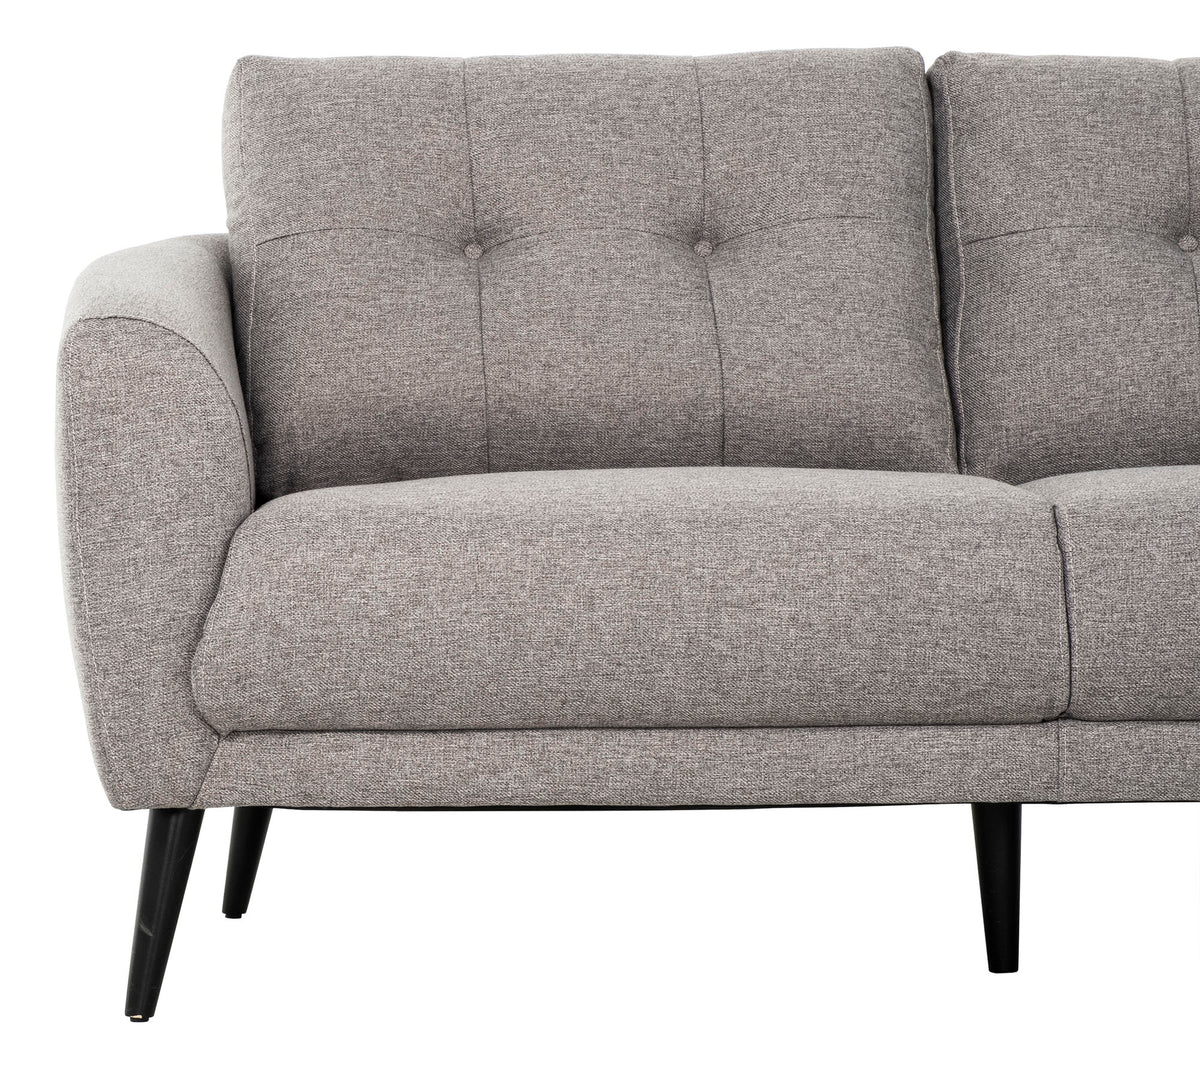 Rhys Gray 2 Piece Sectional - MJM Furniture